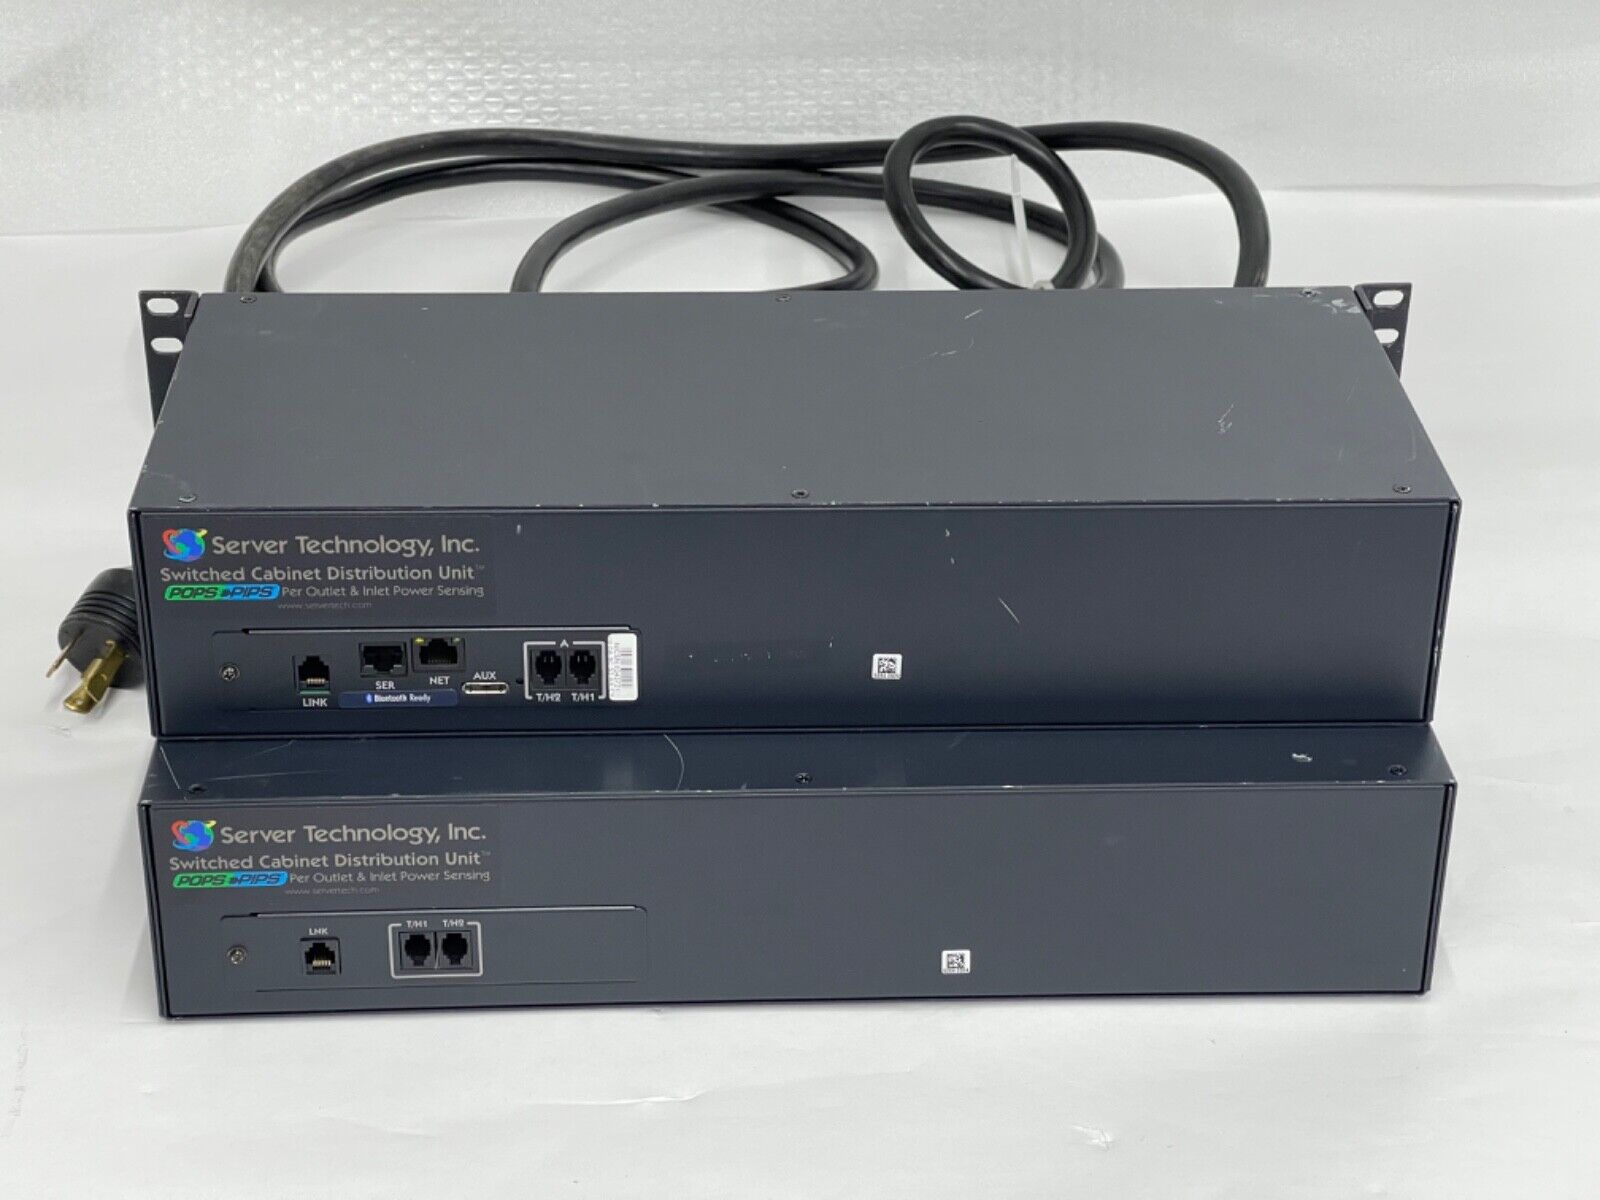 Lot of 2 Servertech Switched:1 x CWG-16H1B454 MASTER & 1 x 16H1B454/TH Expansion